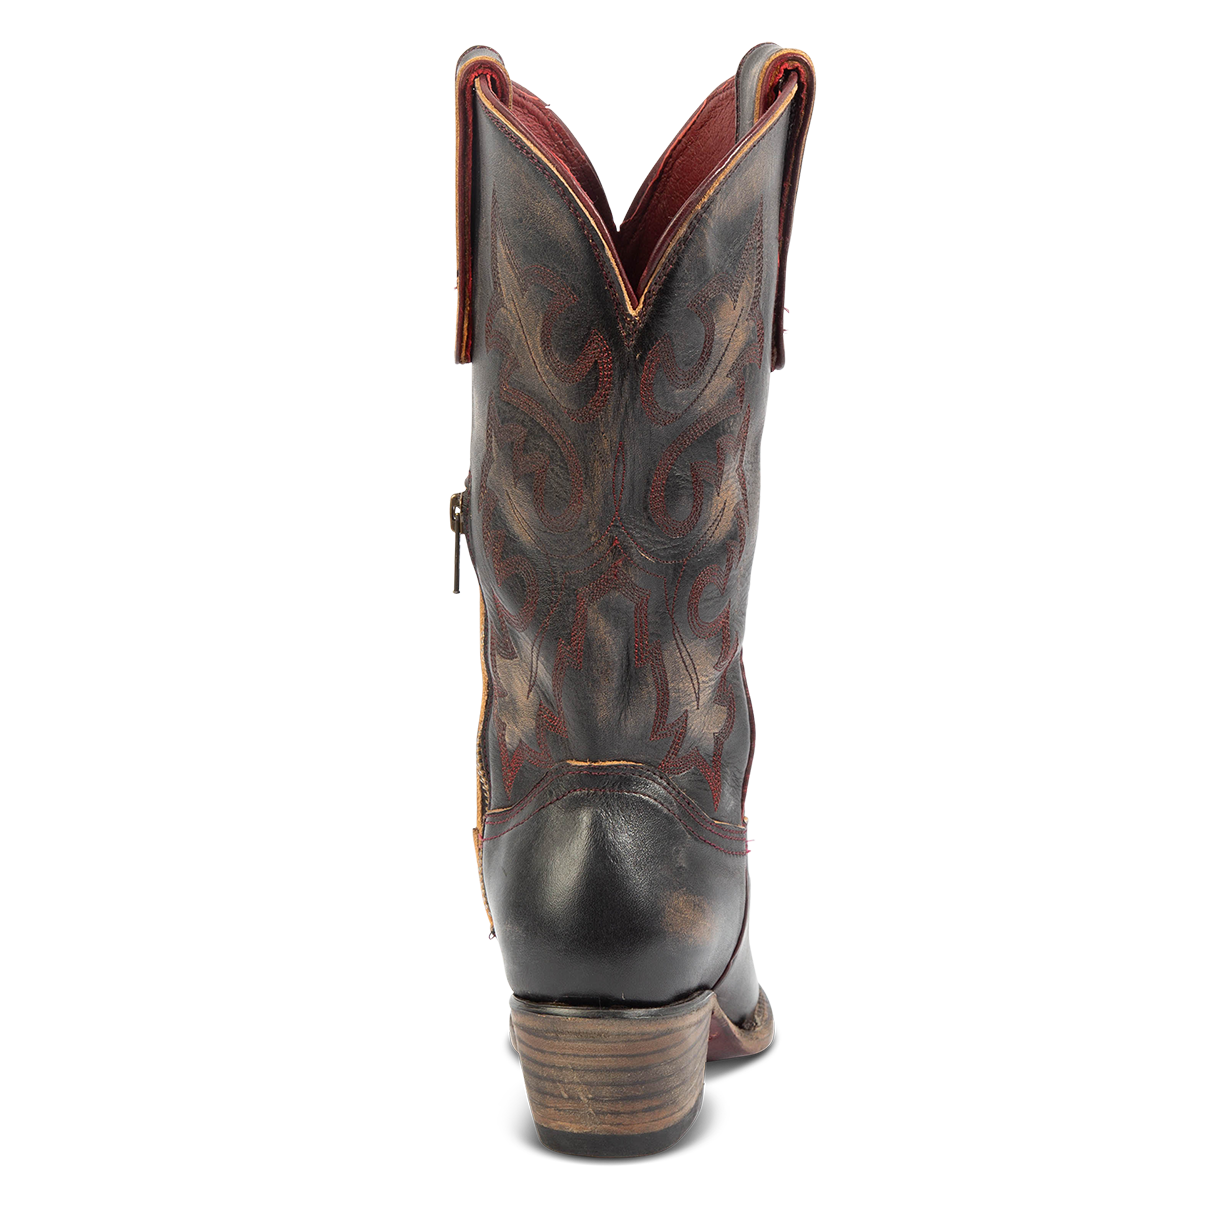 Back view showing intricate stitching and low heel on FREEBIRD women's Wilson Black western boot